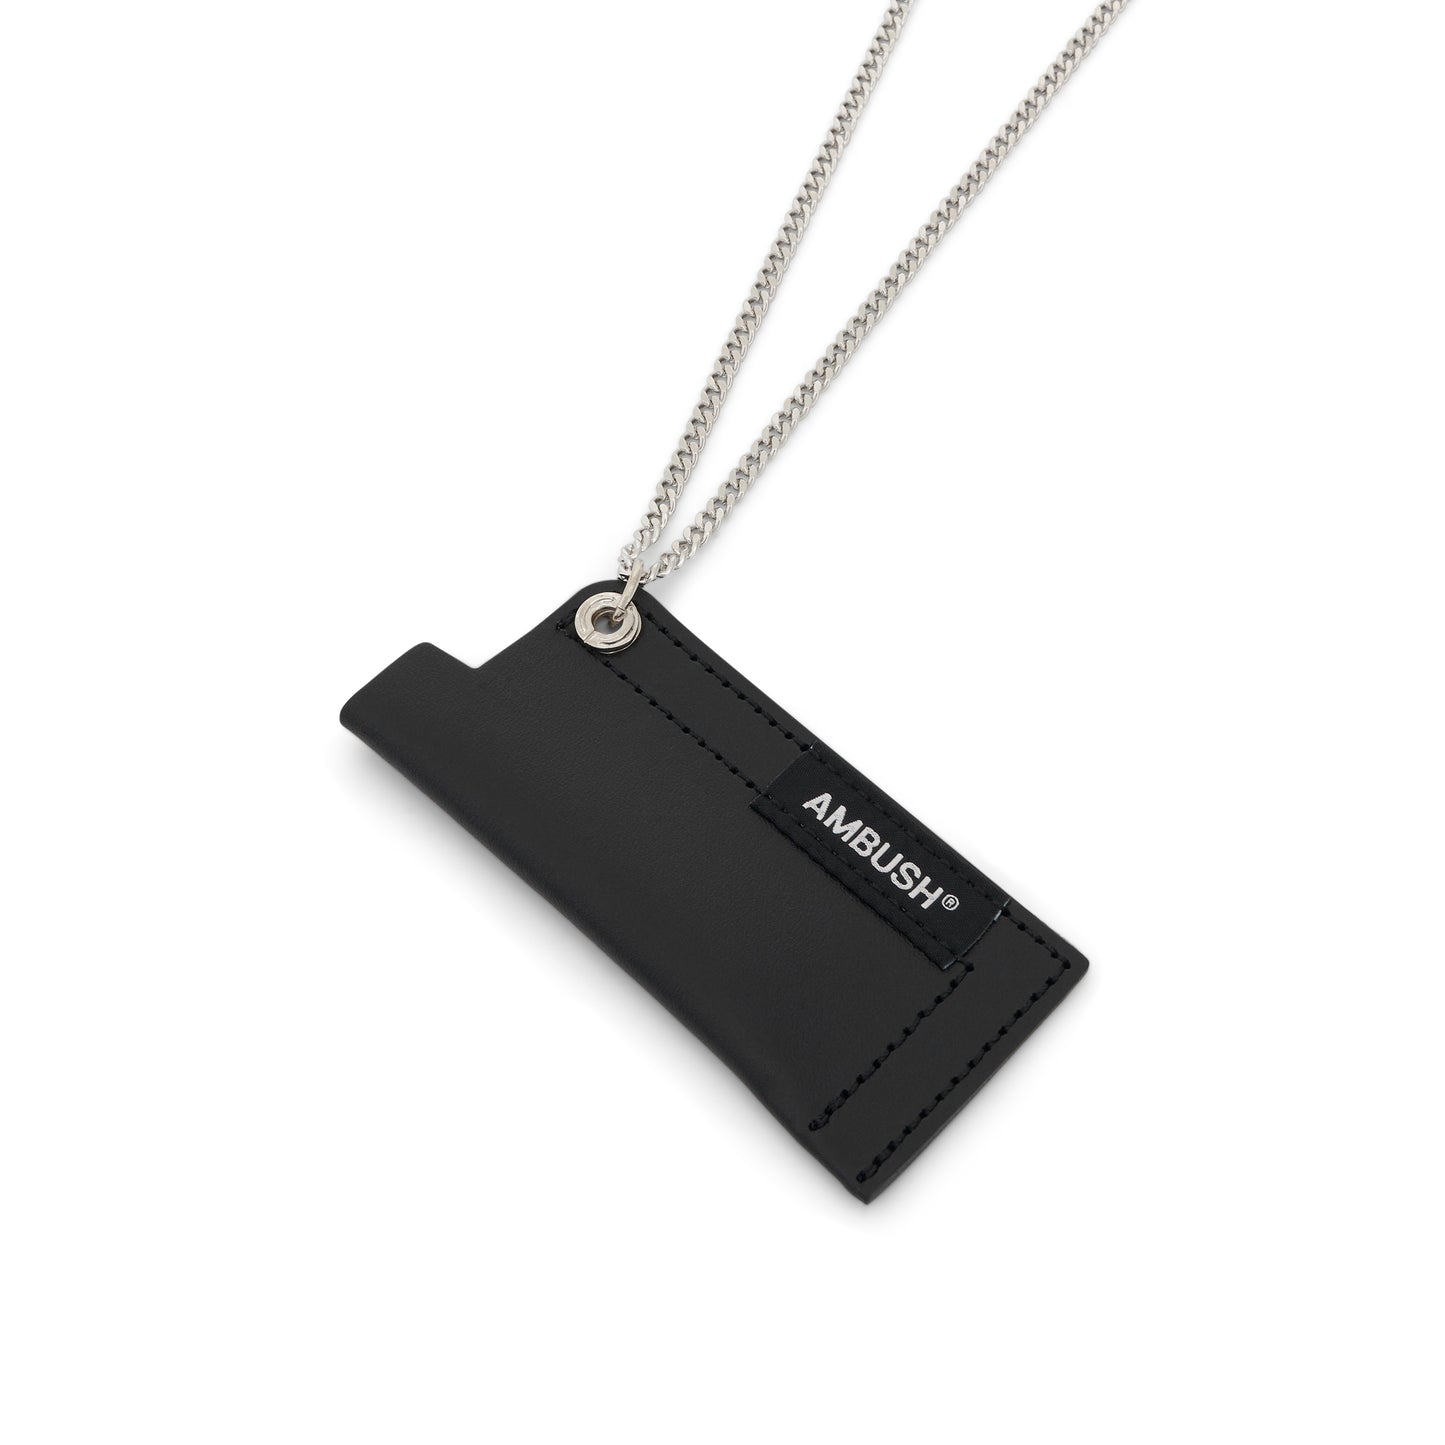 Leather Lighter Case Necklace in Black Silver